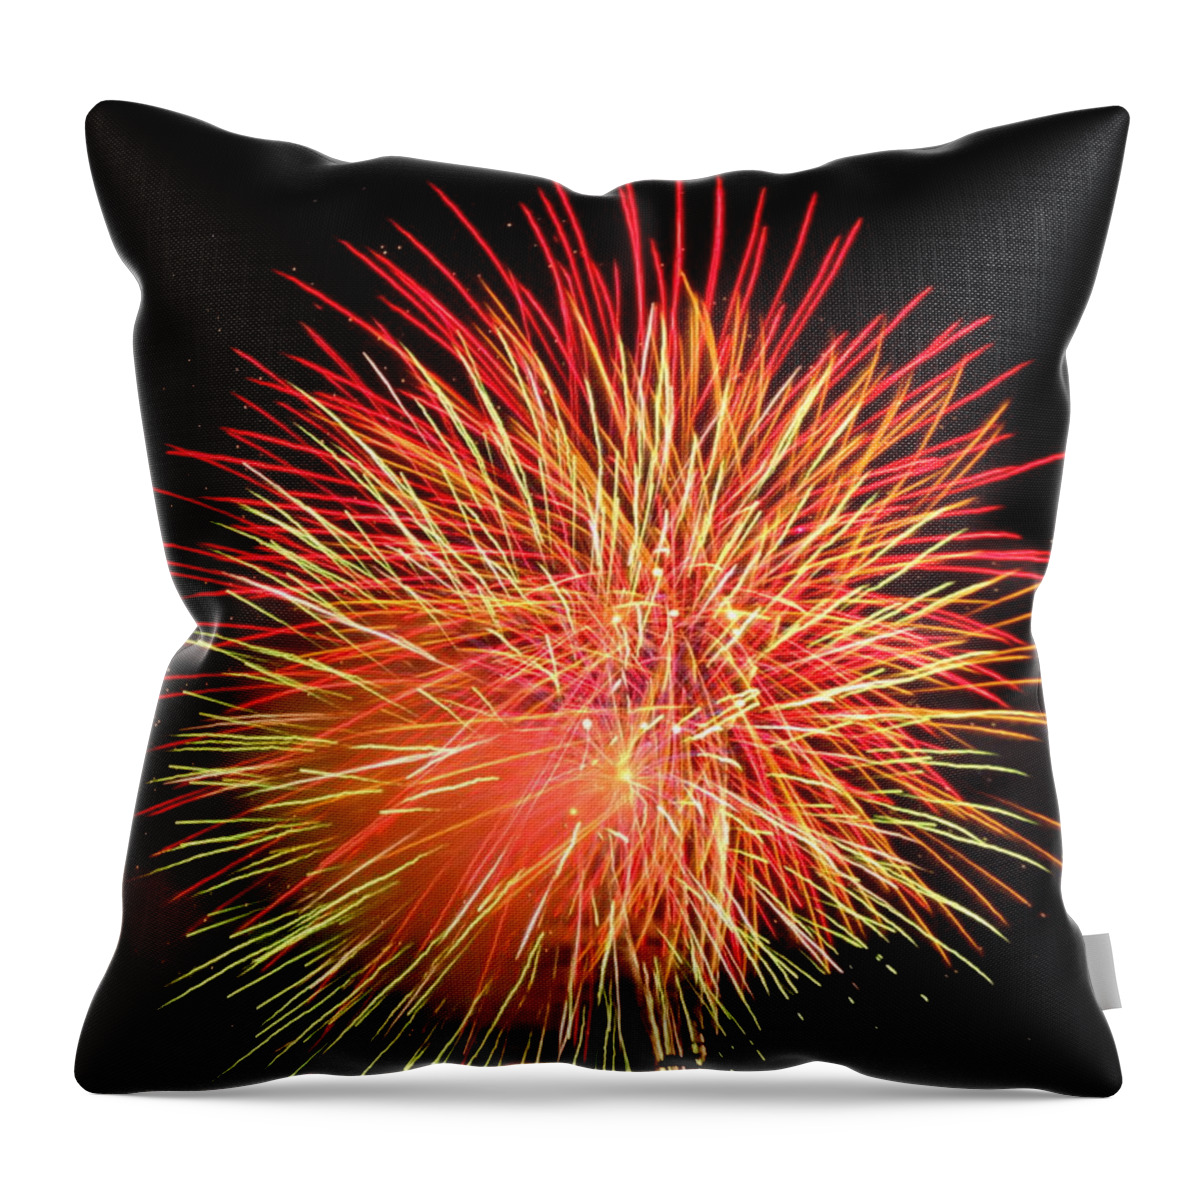 Fireworks Throw Pillow featuring the photograph Fireworks by Michael Porchik